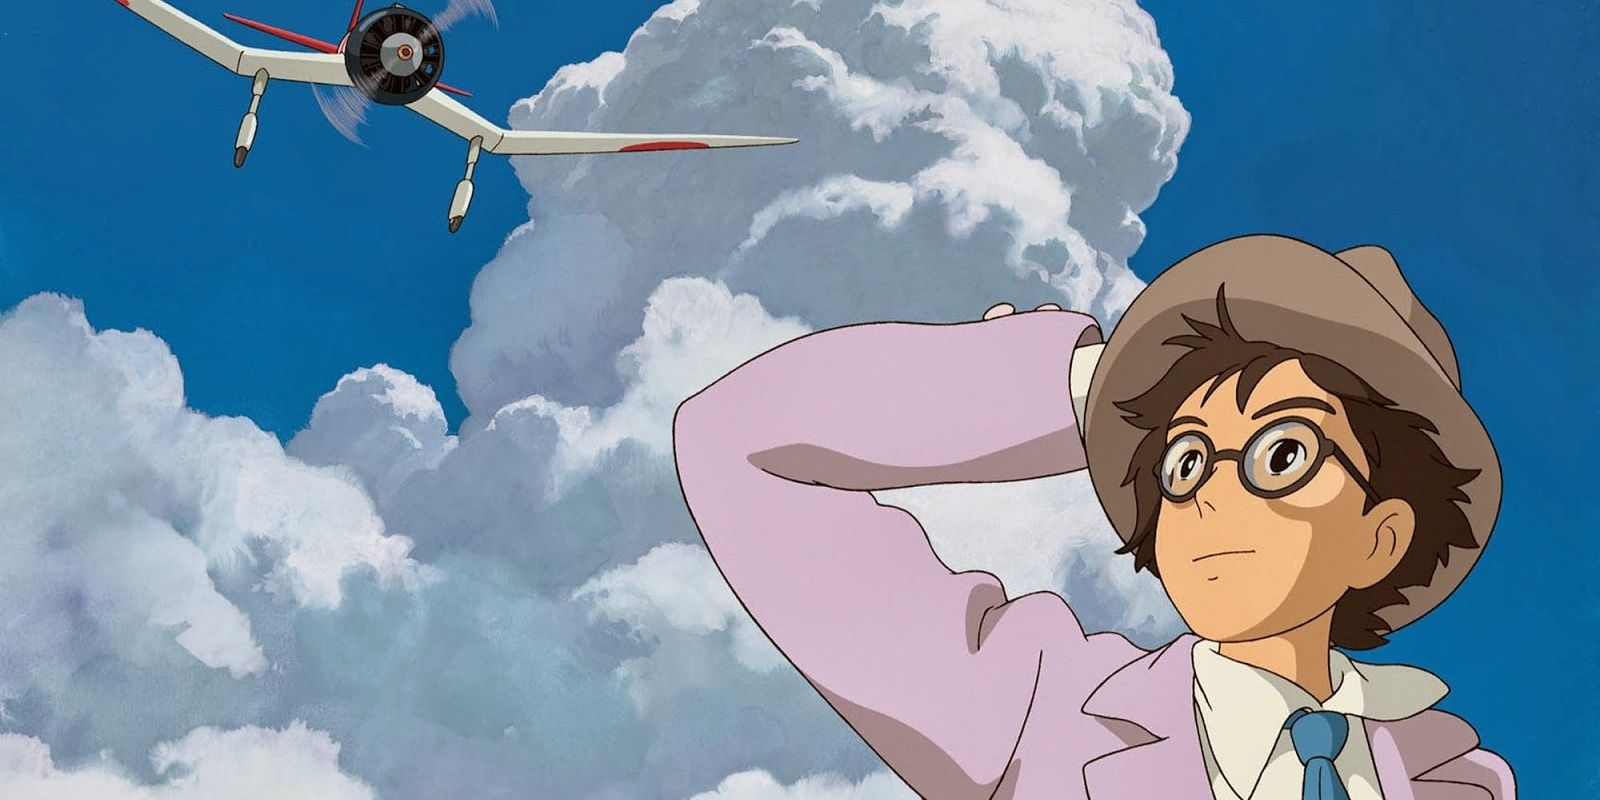 Jiro stops his hat from blowing away and smiles in The Wind Rises